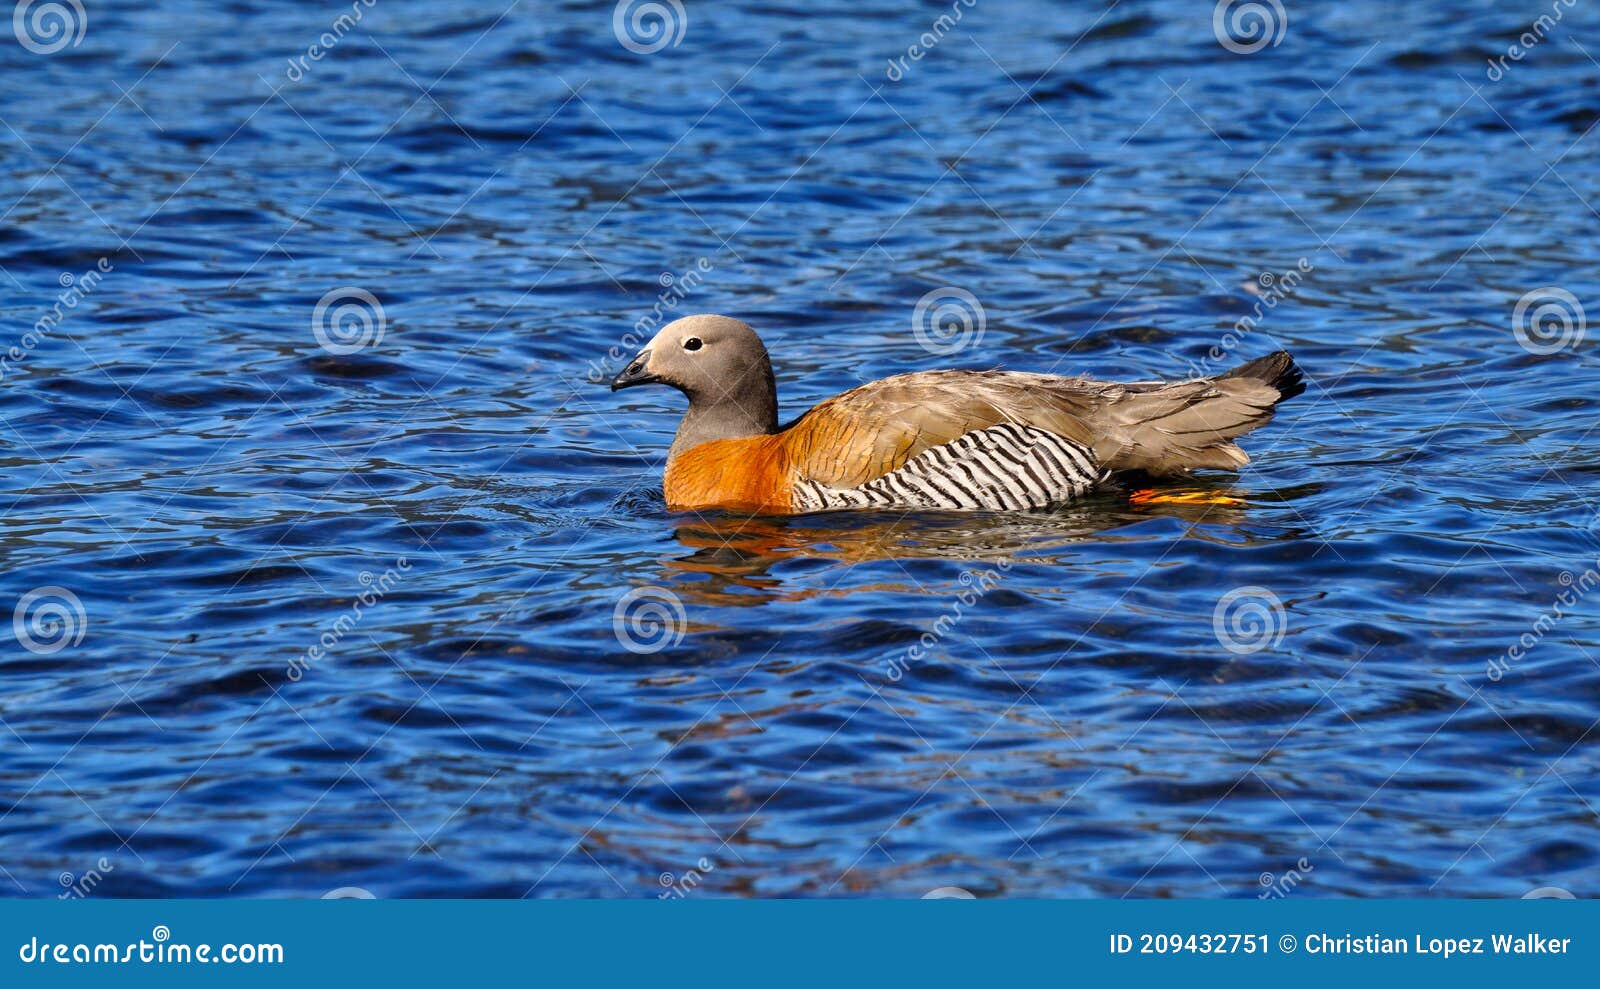 ashy-headed goose in a lake